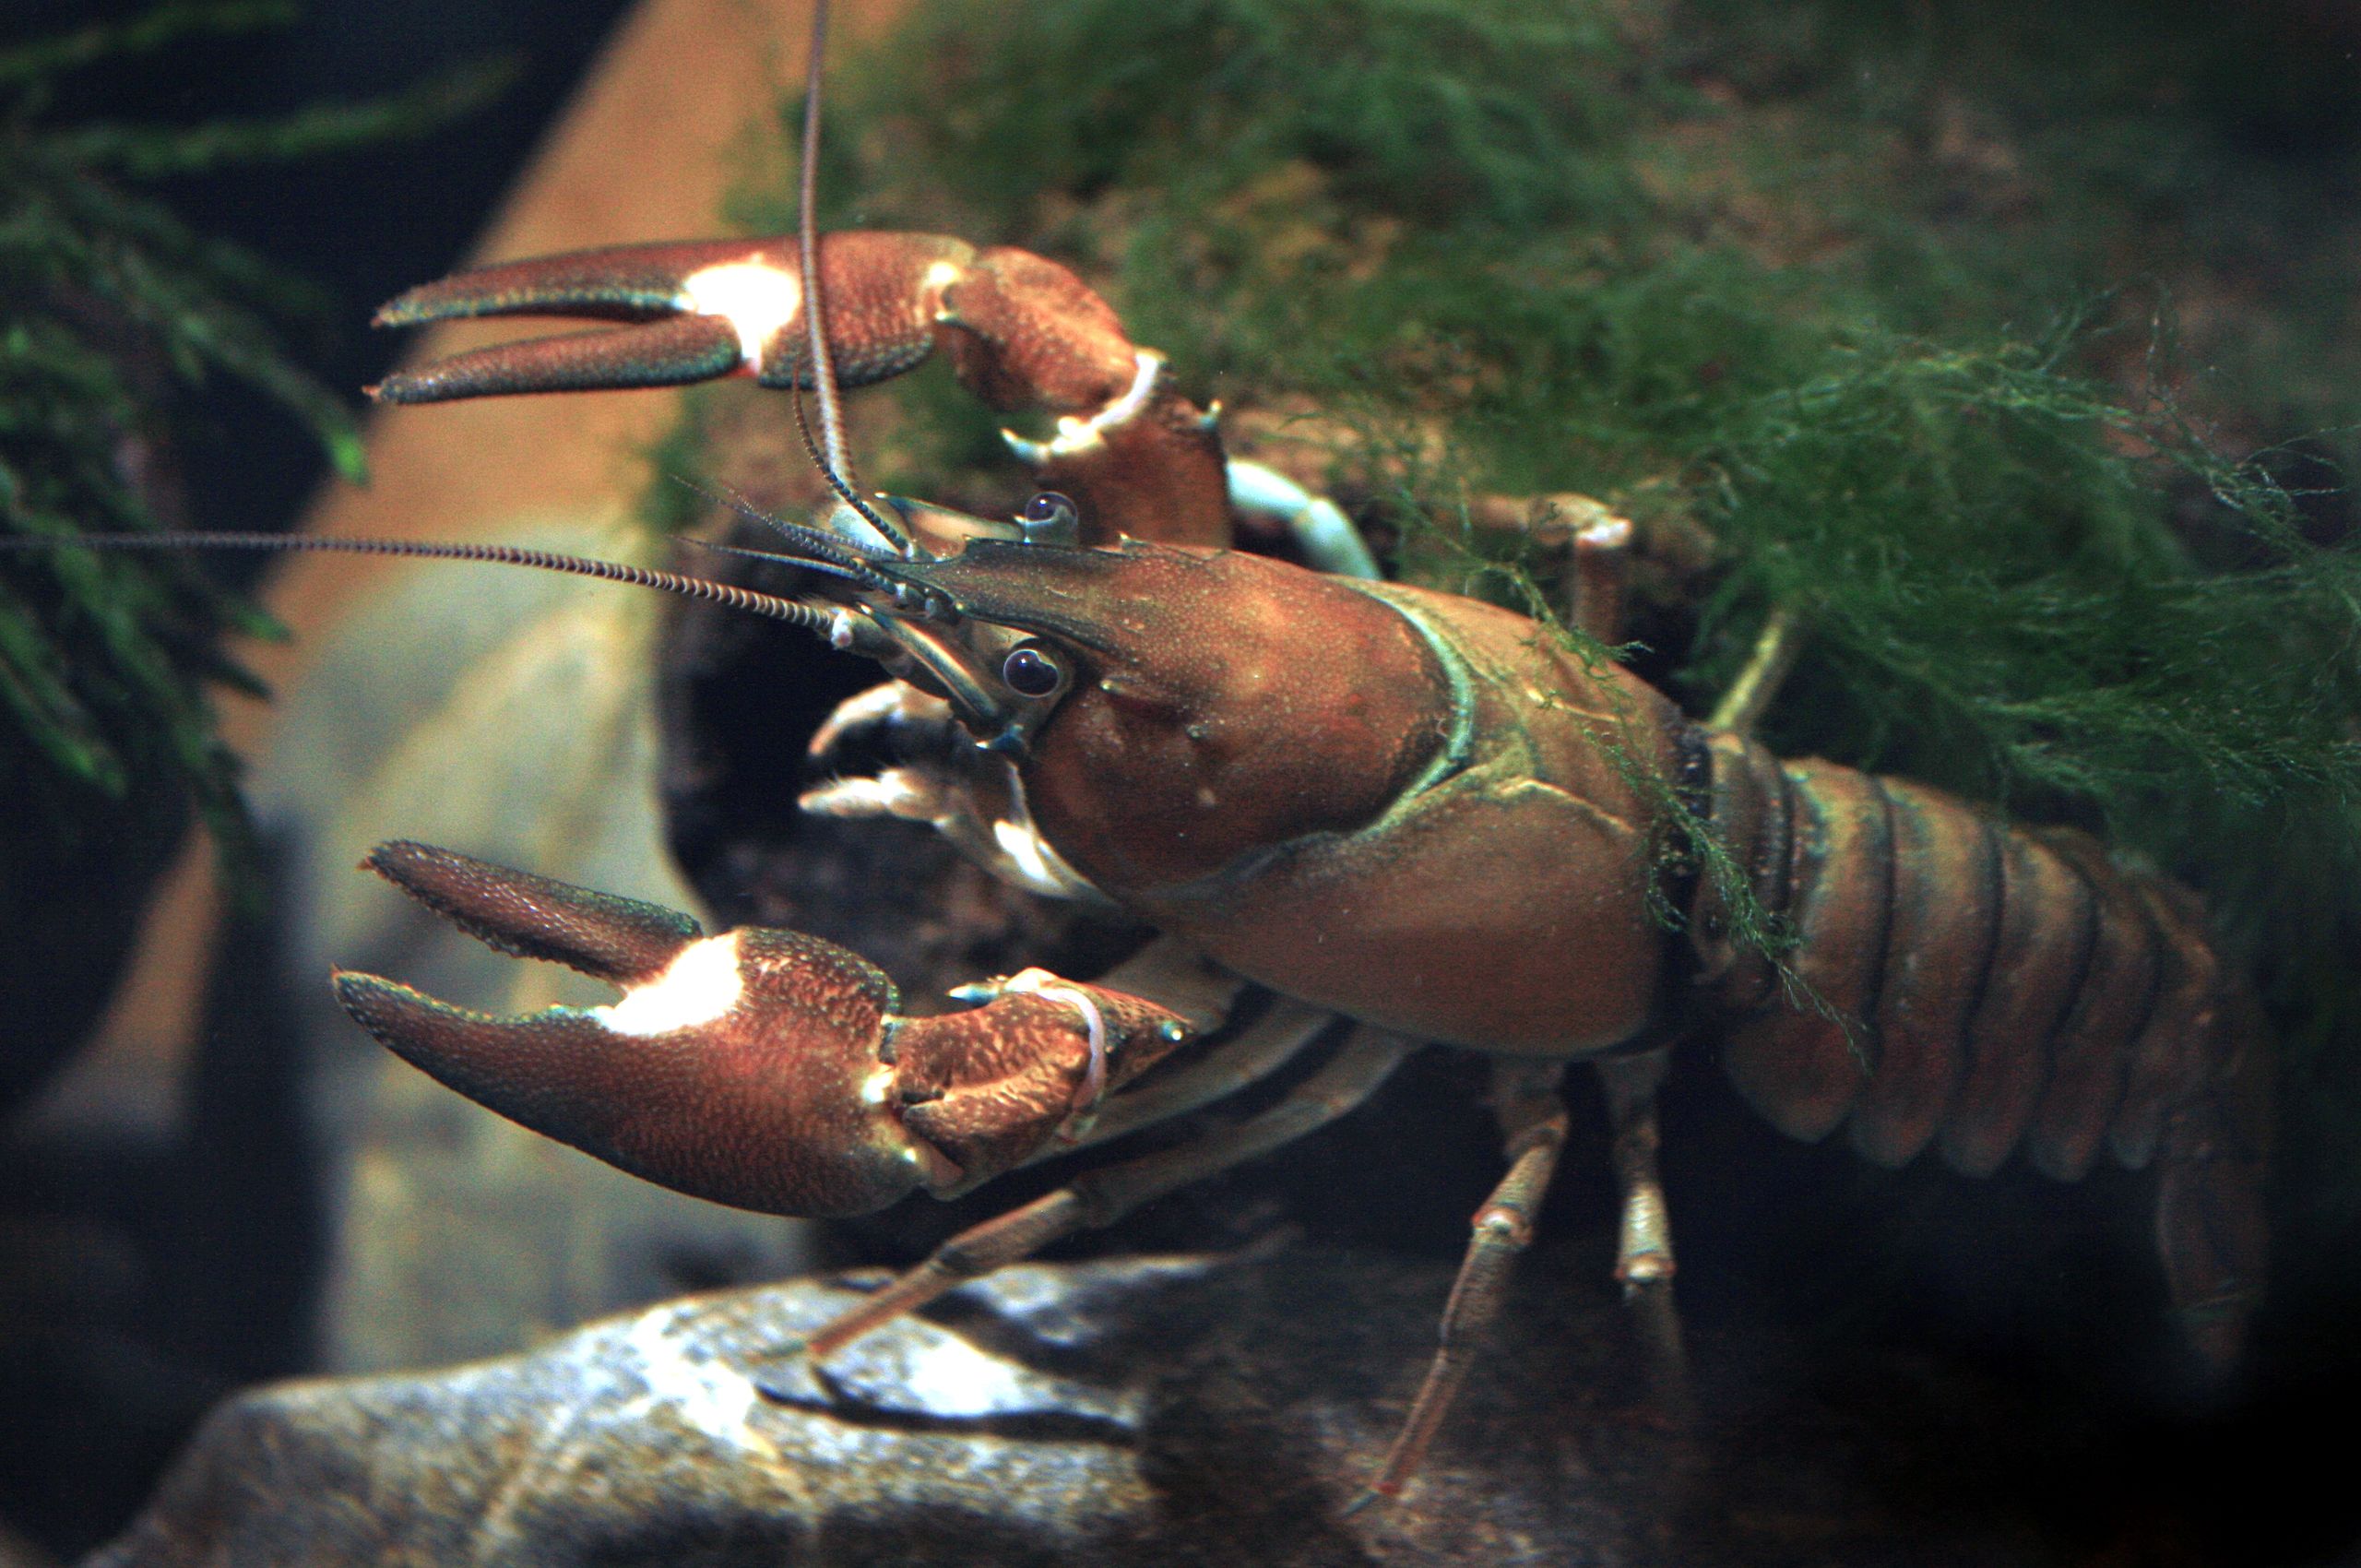 It was introduced to Europe in the 1960s to supplement the North European Astacus astacus fisheries, which were being damaged by crayfish plague, but the imports turned out to be a carrier of that disease. The signal crayfish is now considered an invasive species across Europe, Japan, and California ousting native species there.